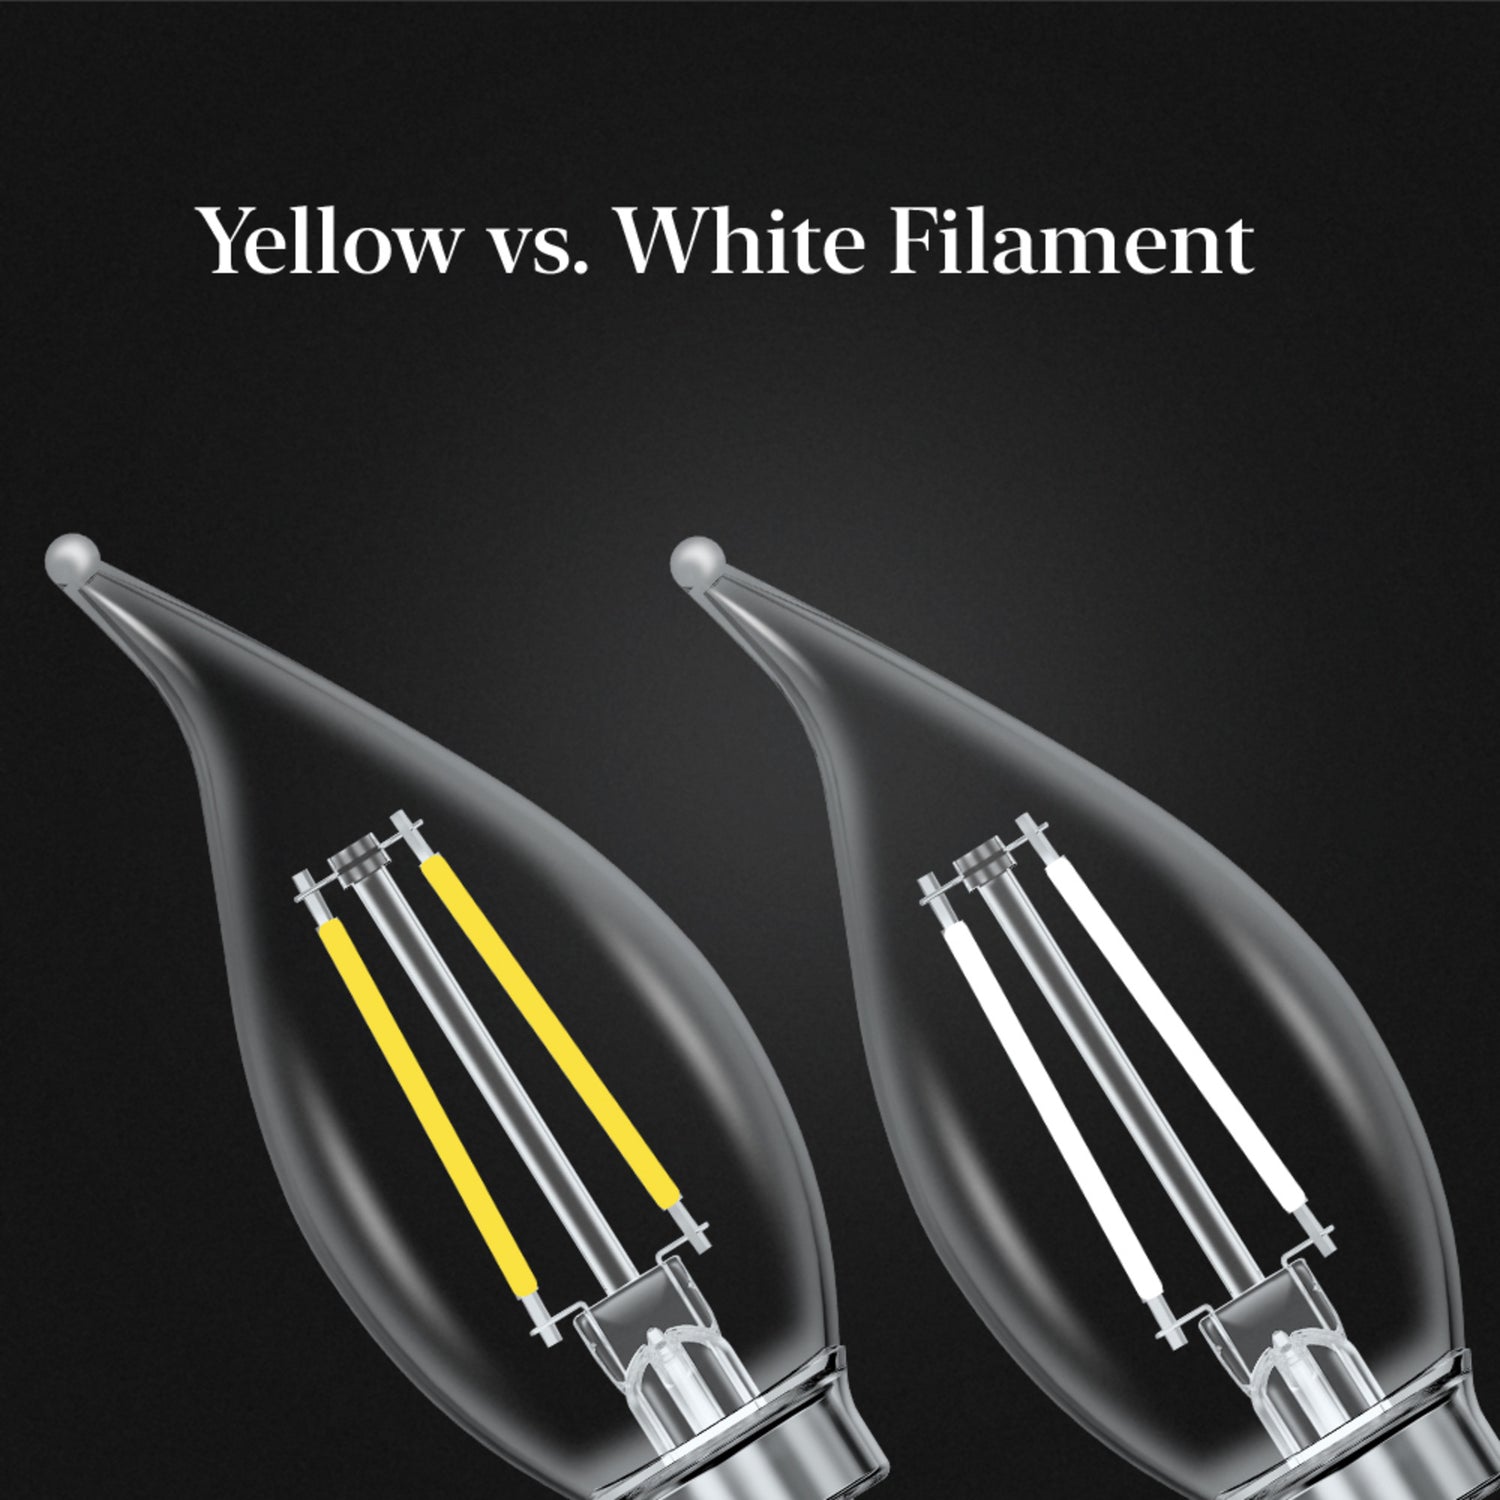 3.3W (40W Replacement) Soft White (2700K) Flame Tip BA10 (E12 Base) Exposed White Filament LED Bulb (3-Pack)